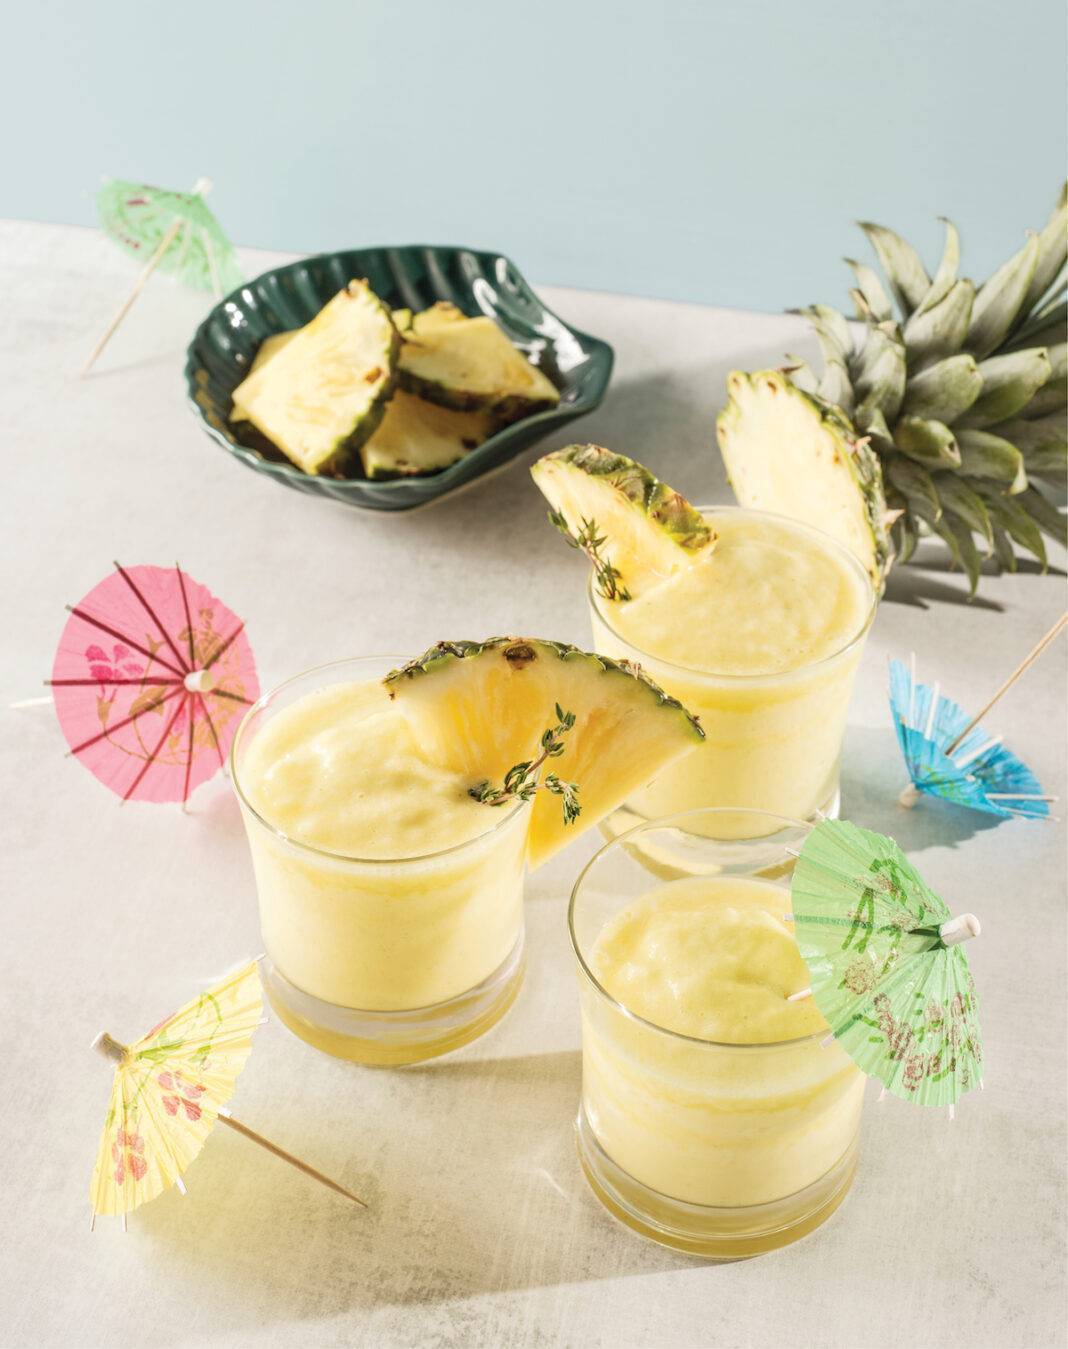 Pineapple, Thyme, and Coconut Water Whip